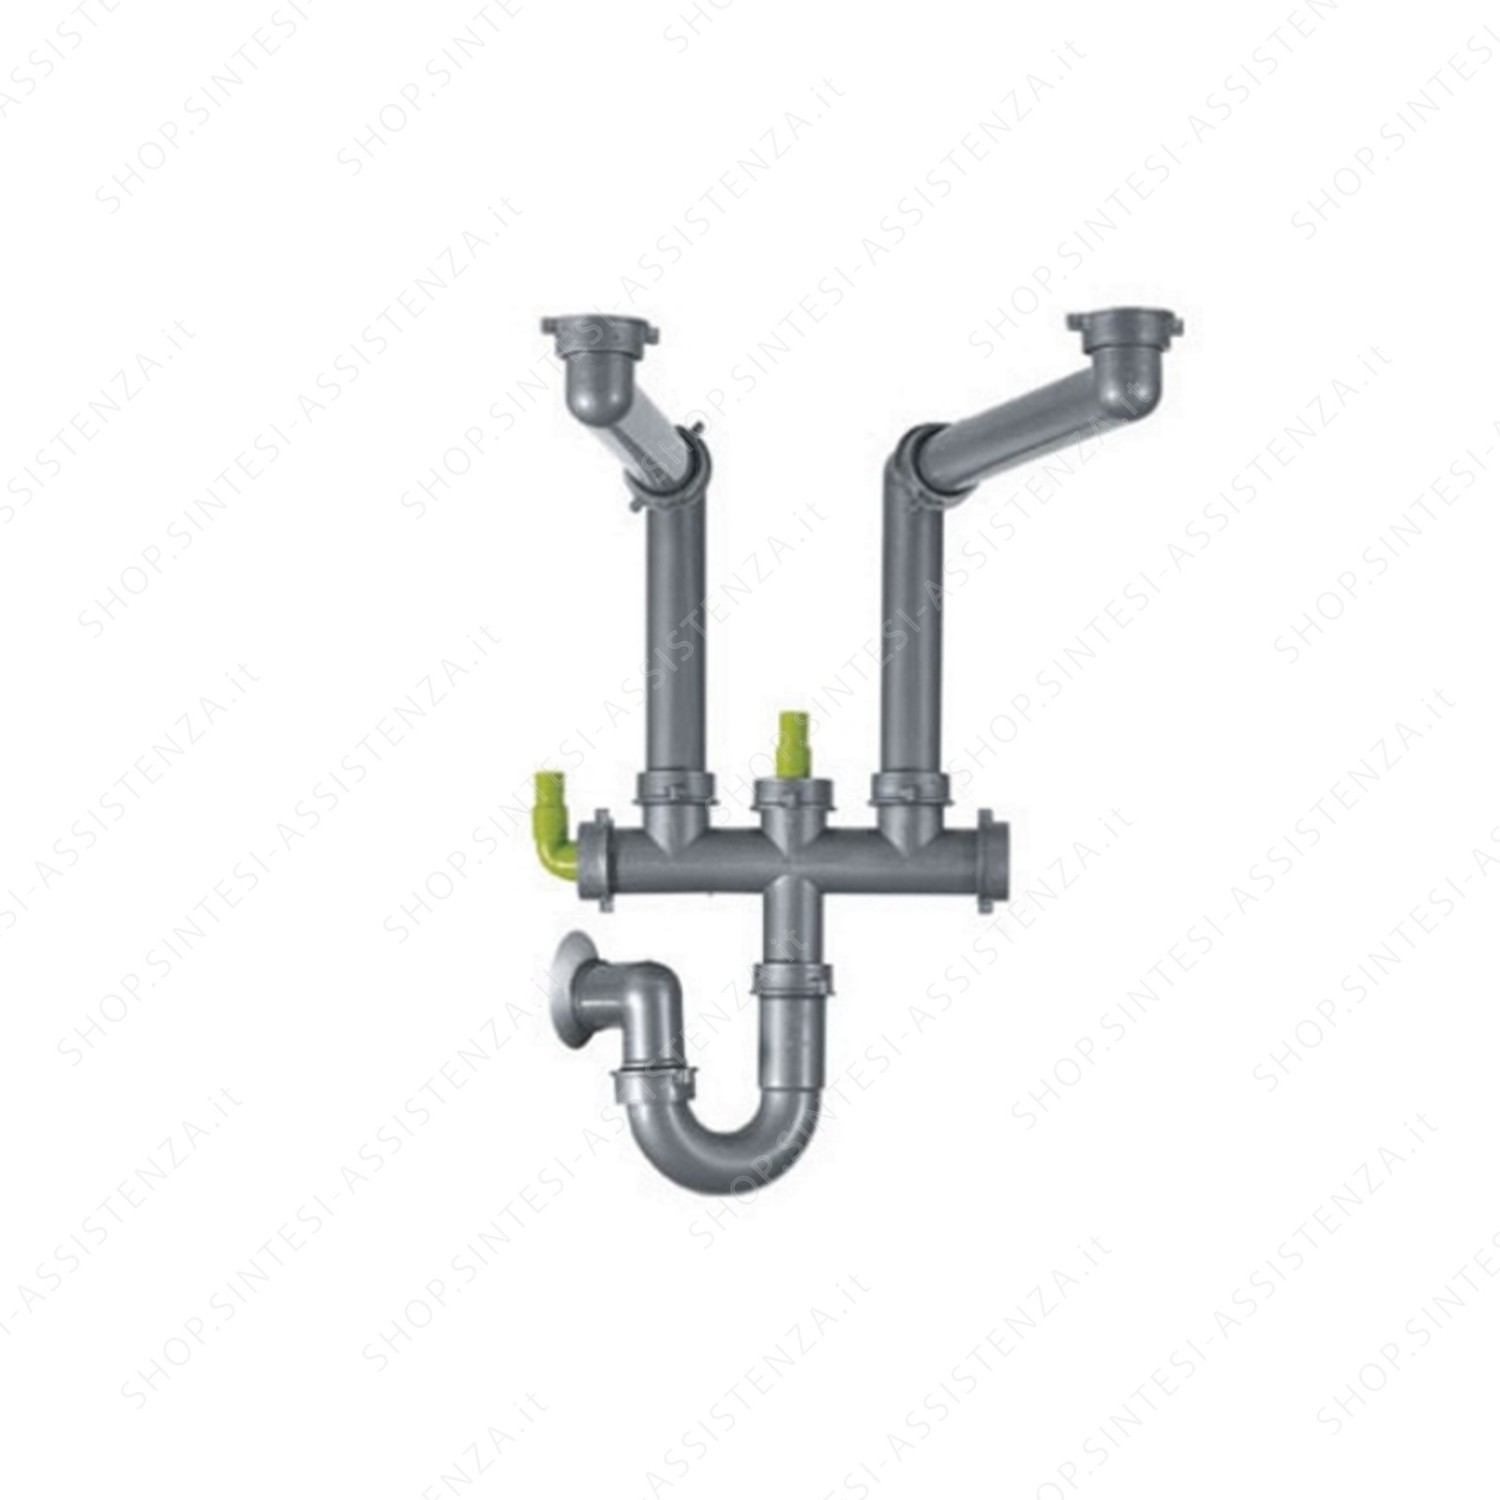 2-WAY SIPHON FOR 2-BOWL SINKS WITH DISHWASHER DRAIN CONNECTION 112.0048.209 - 112.0048.209 FR